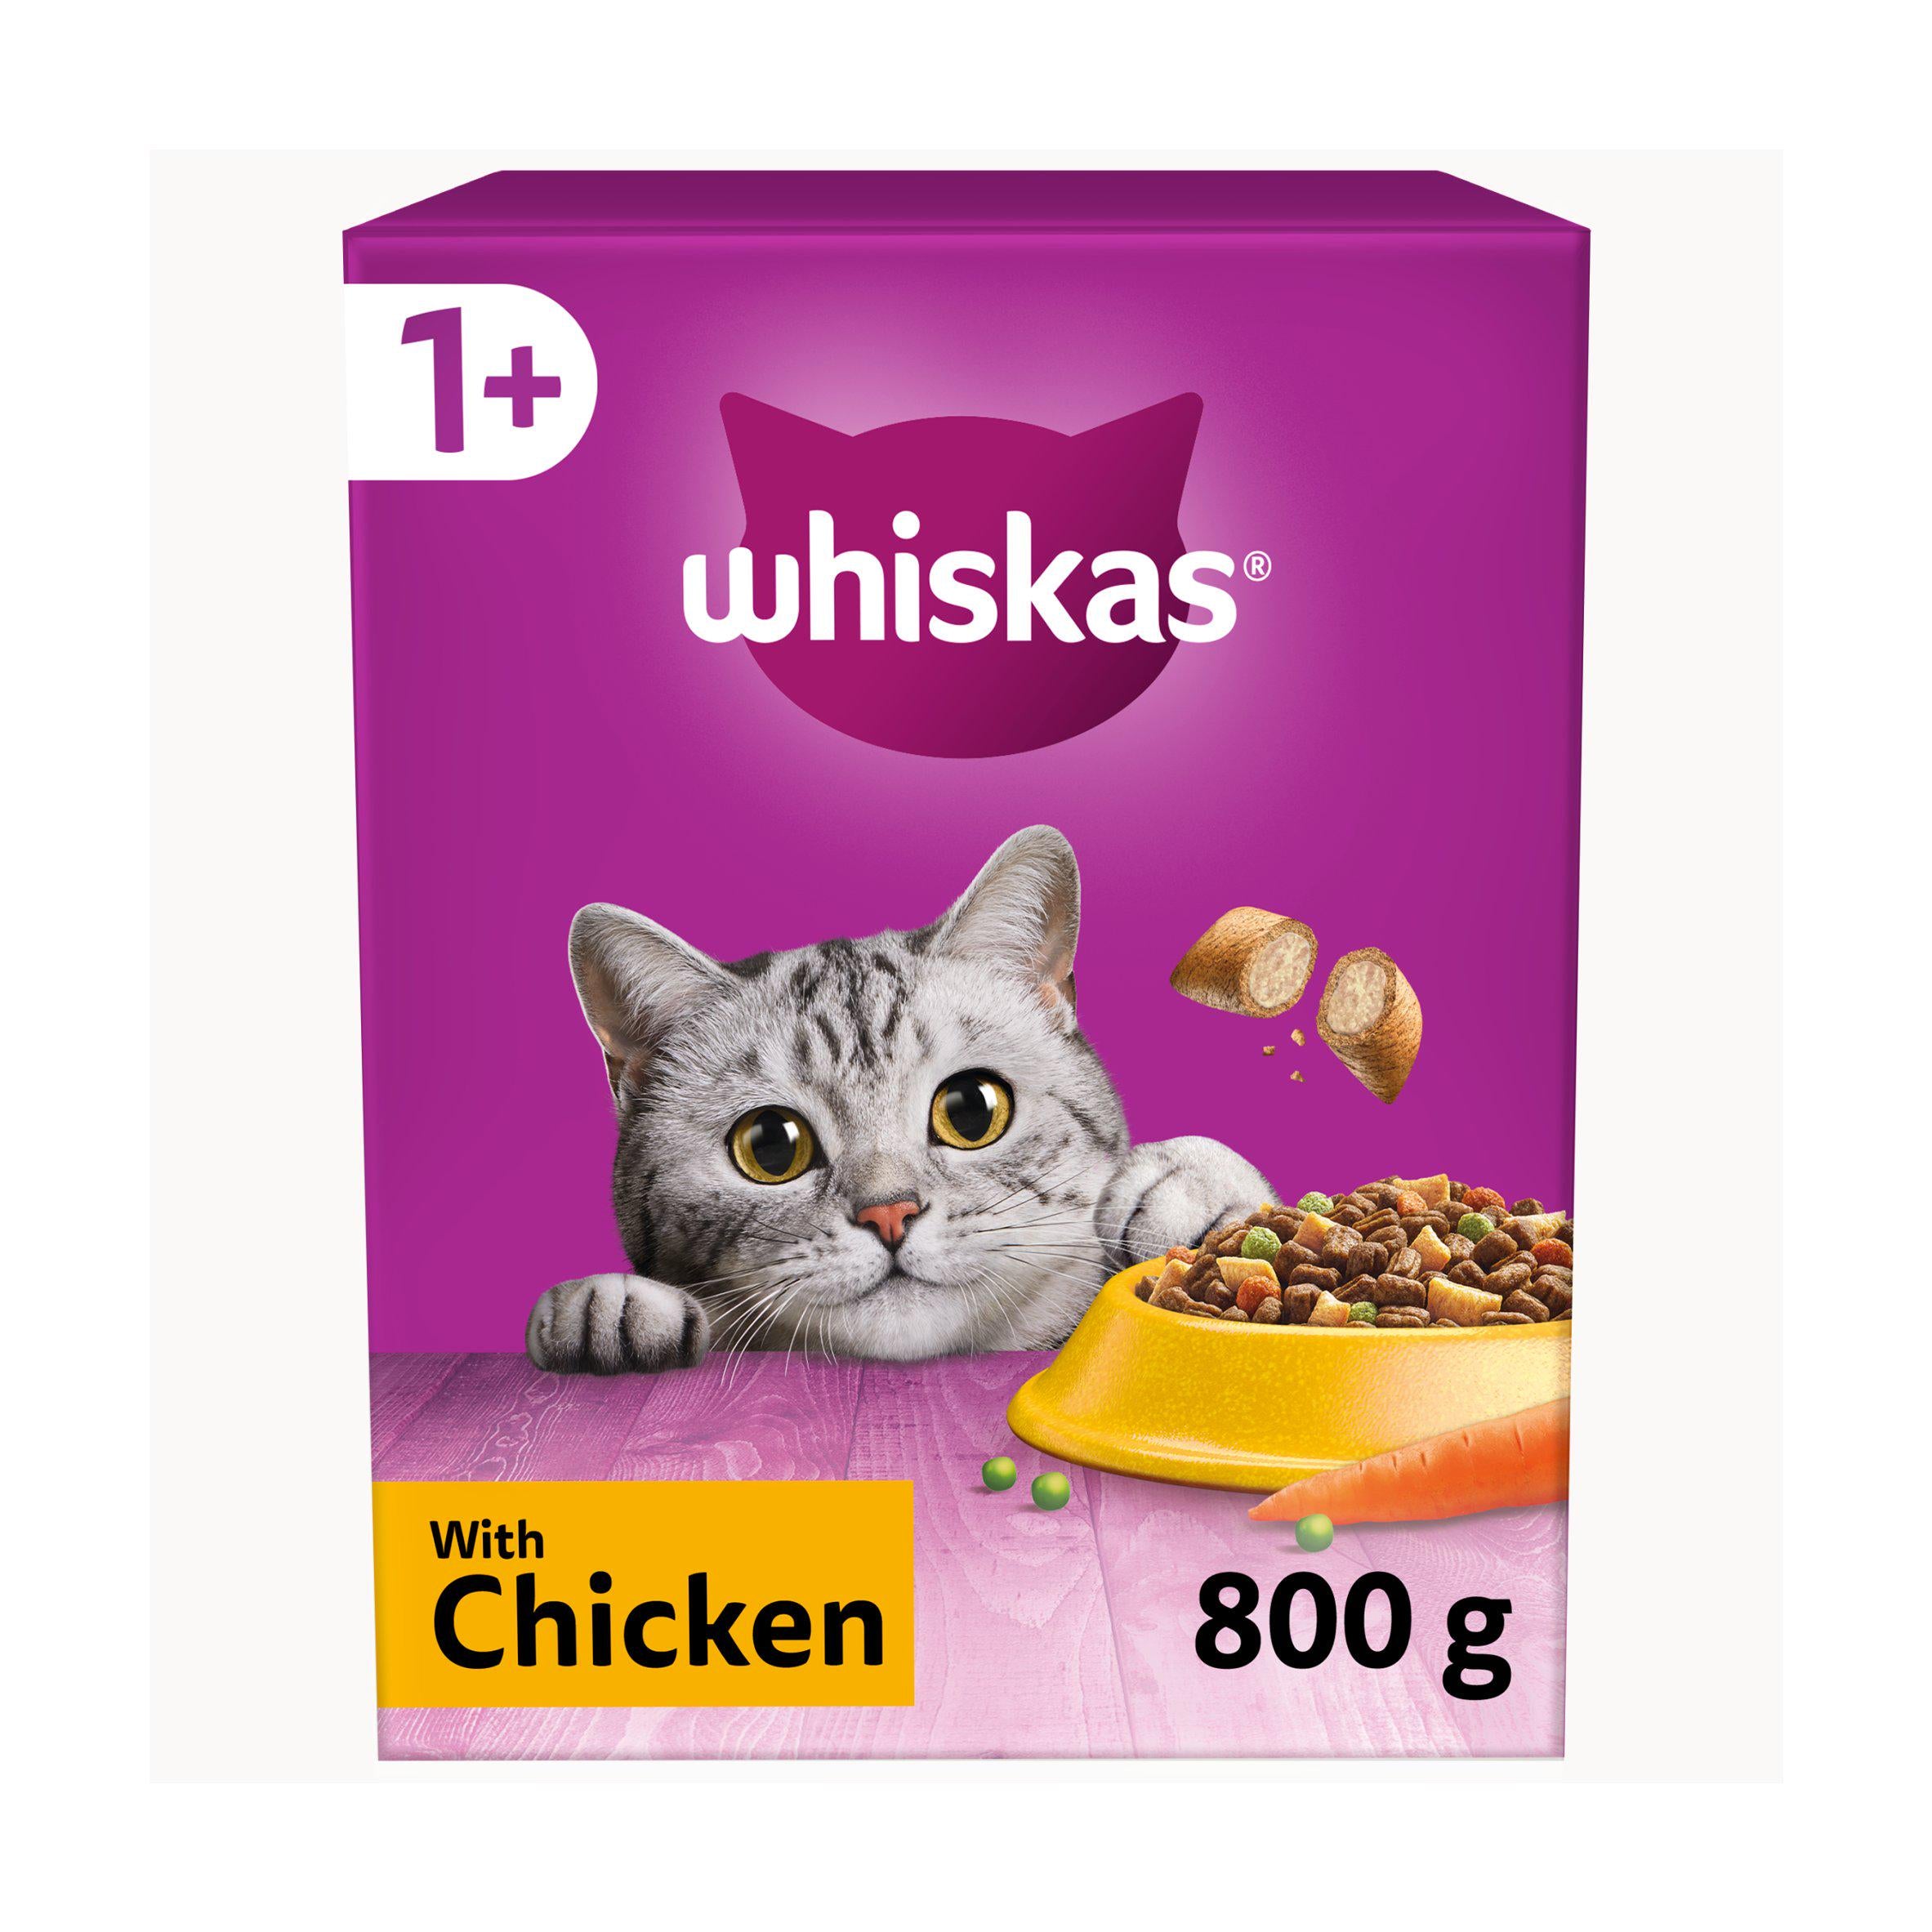 Whiskas 1+ Chicken Complete Adult Dry Cat Food 800g GOODS Sainsburys   